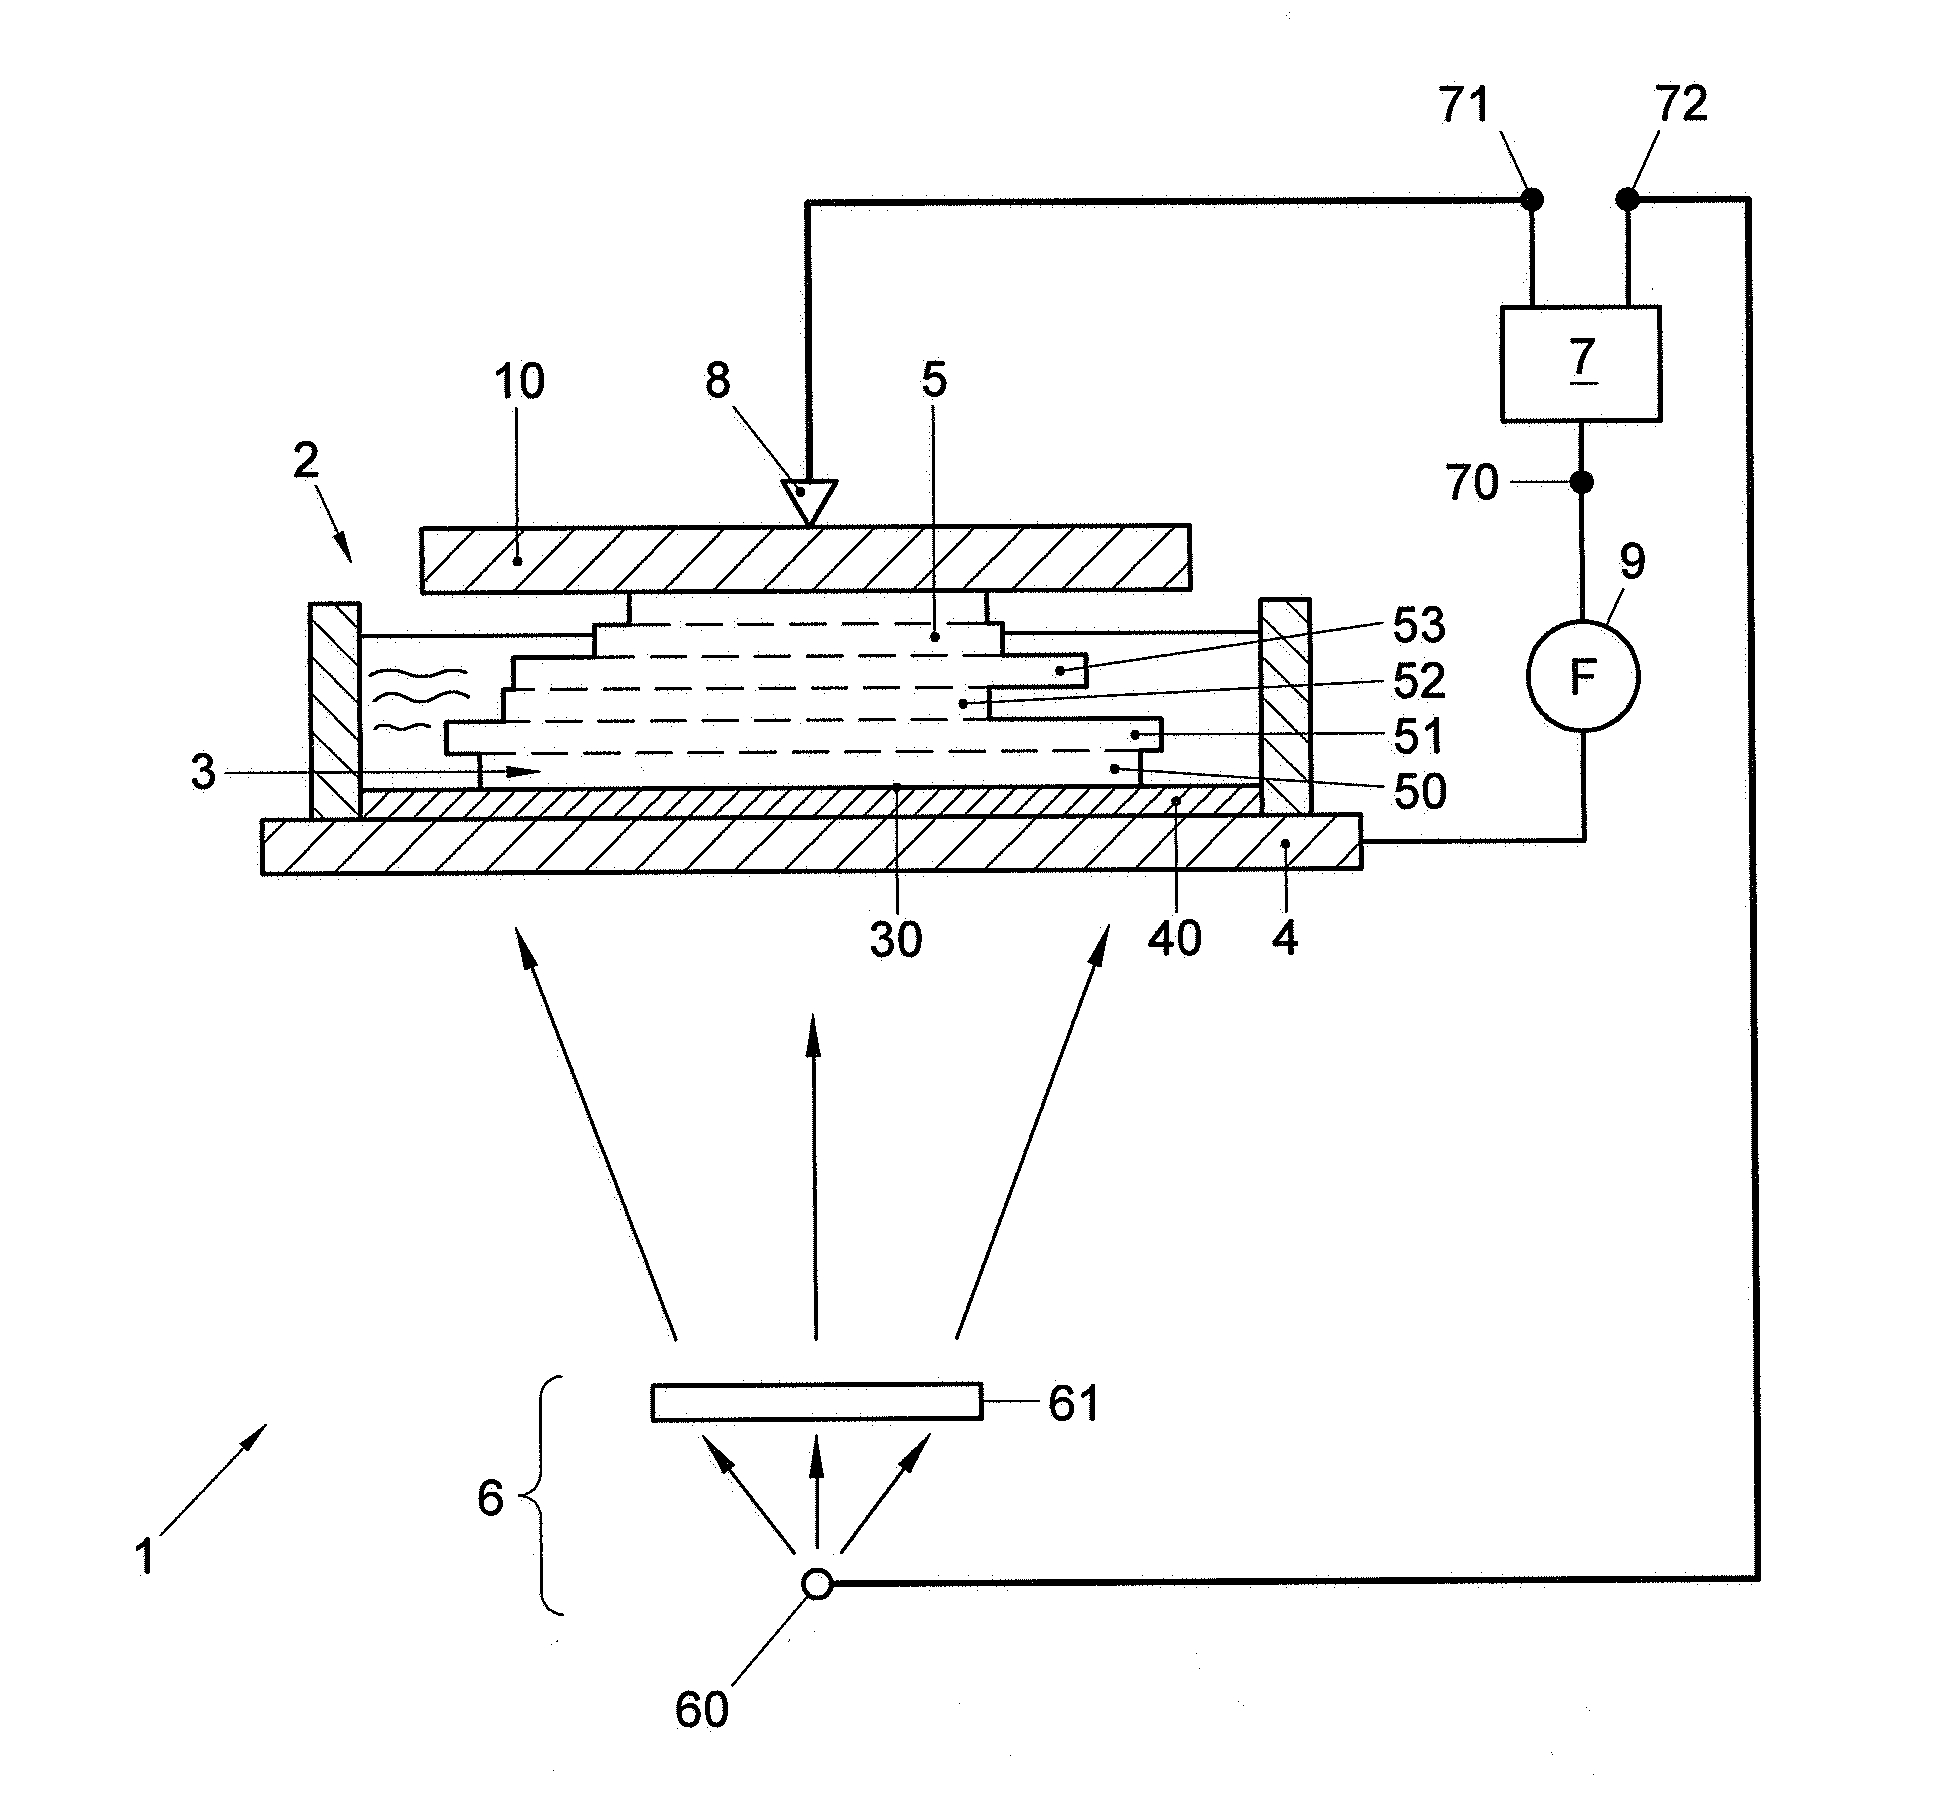 System and method for producing a tangible object